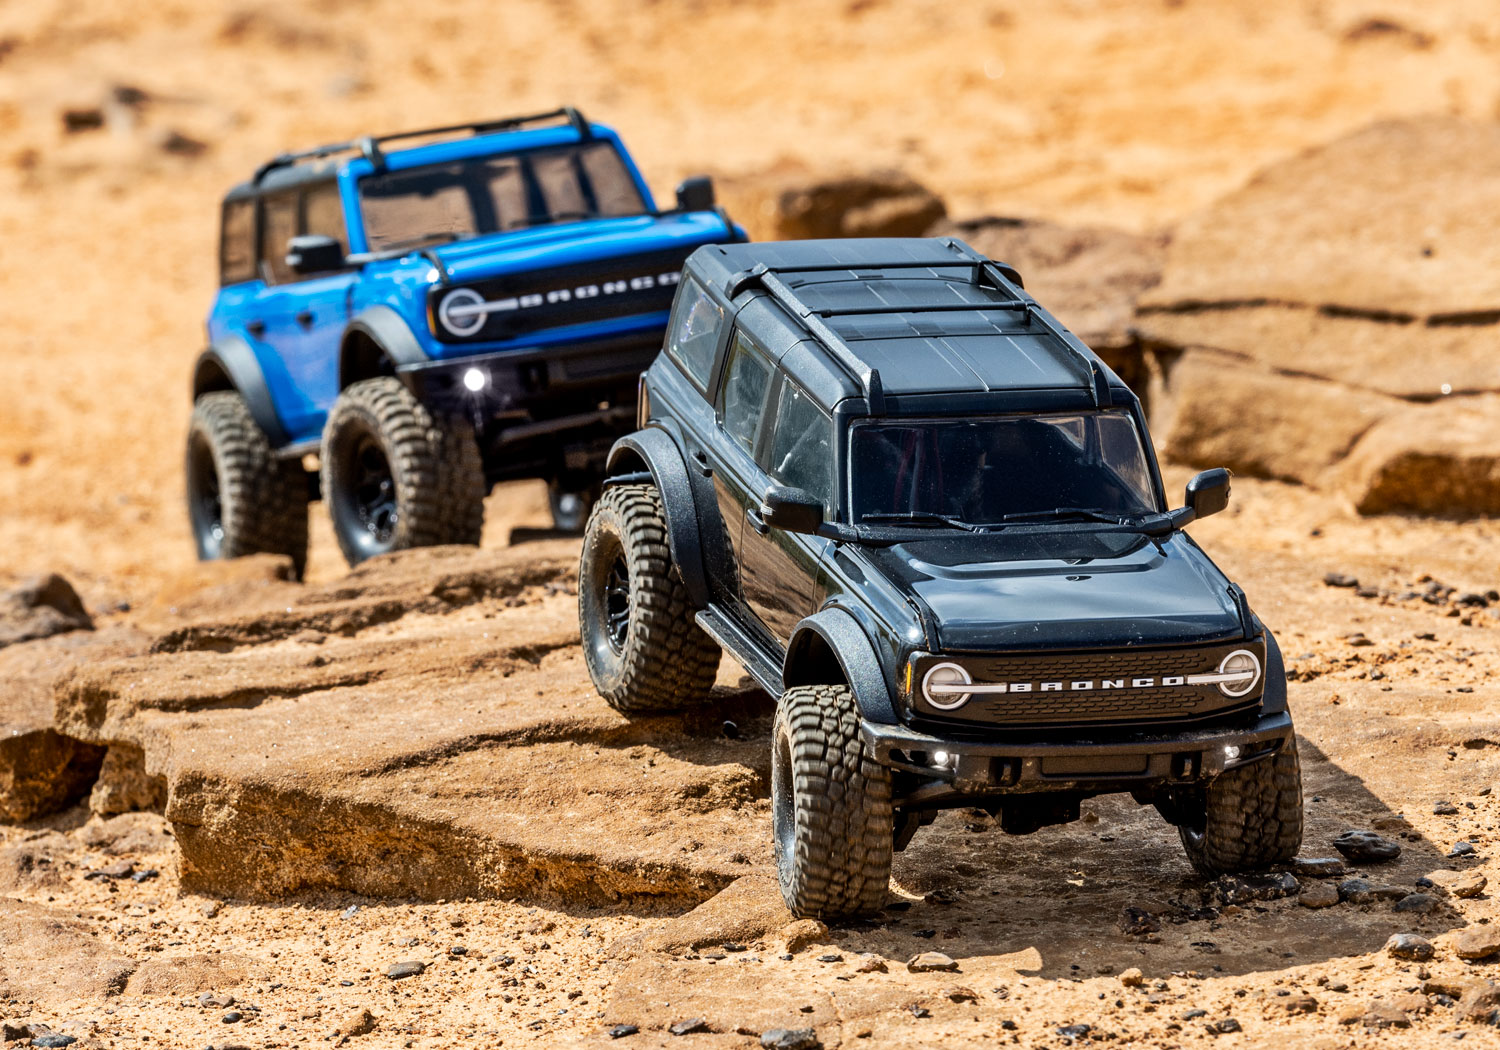 Traxxas TRX-4M 1/18 Scale and Trail Crawler Ford Bronco 4WD Electric Truck - Wit